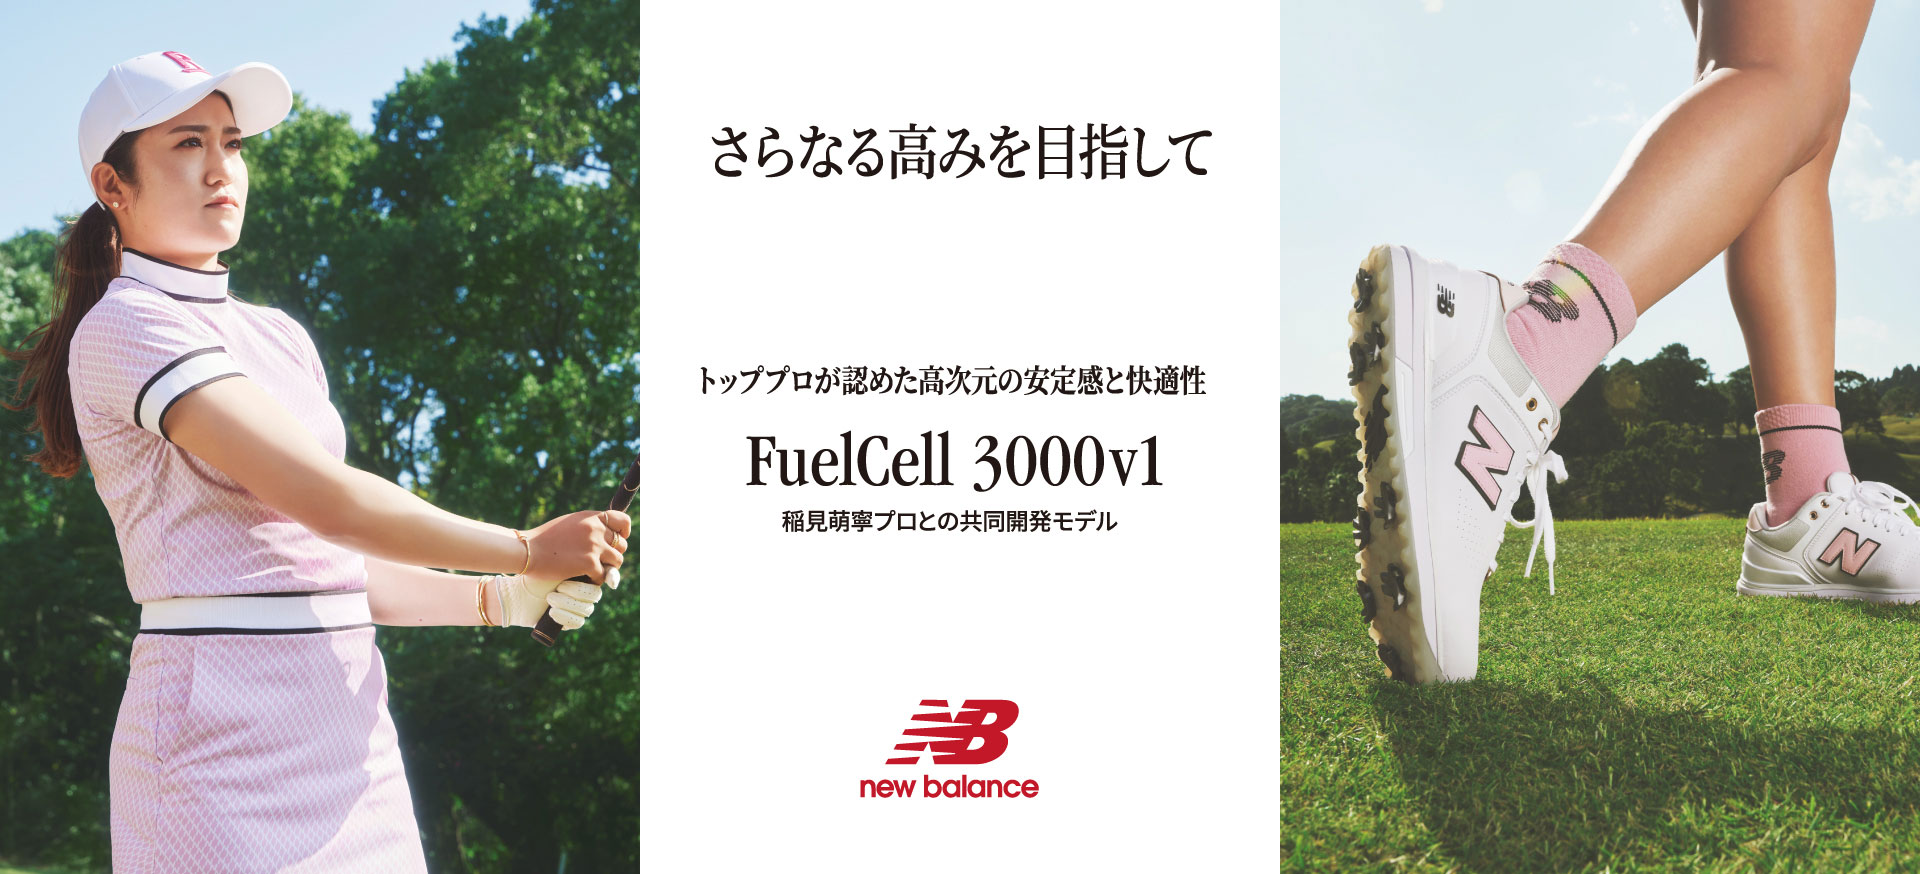 Fuelcell 3000v1bSt